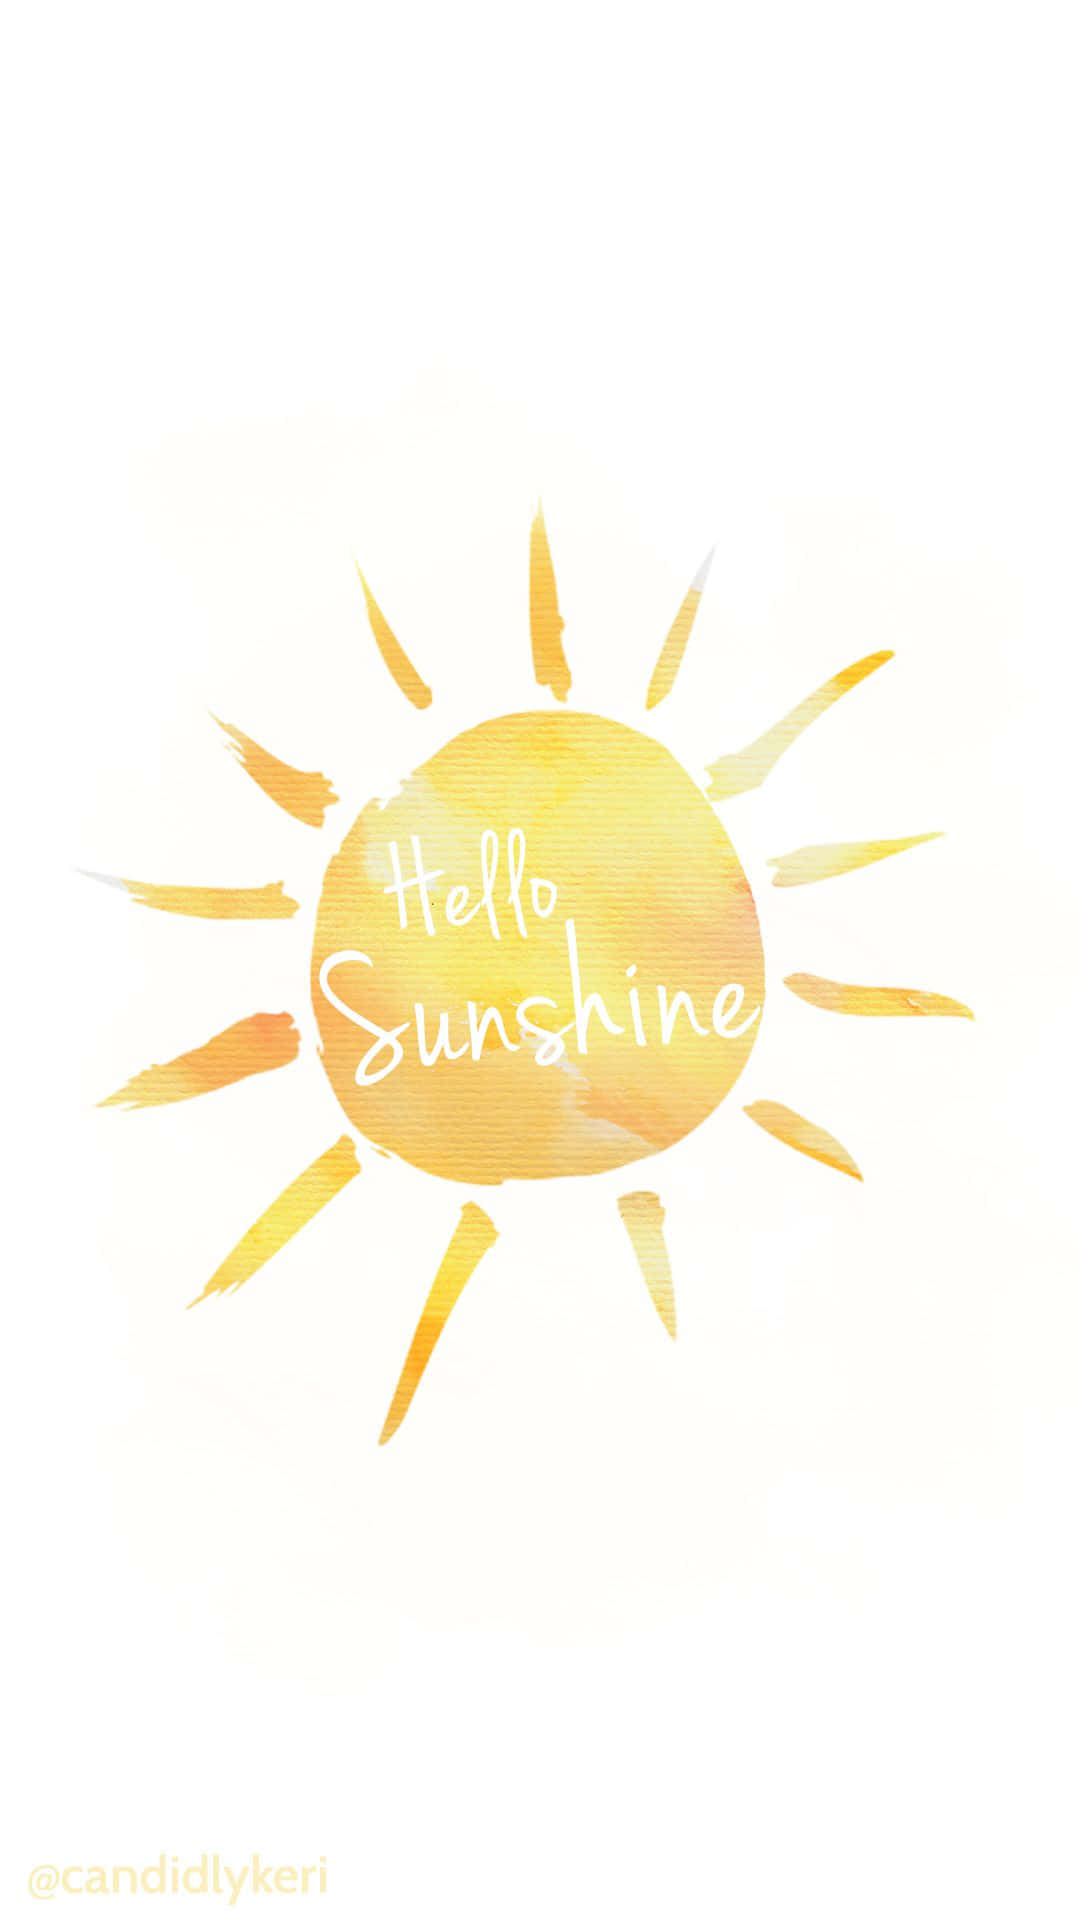 Yellow hello sunshine sun illustration wallpaper you can download for free on the blog! - Sunshine